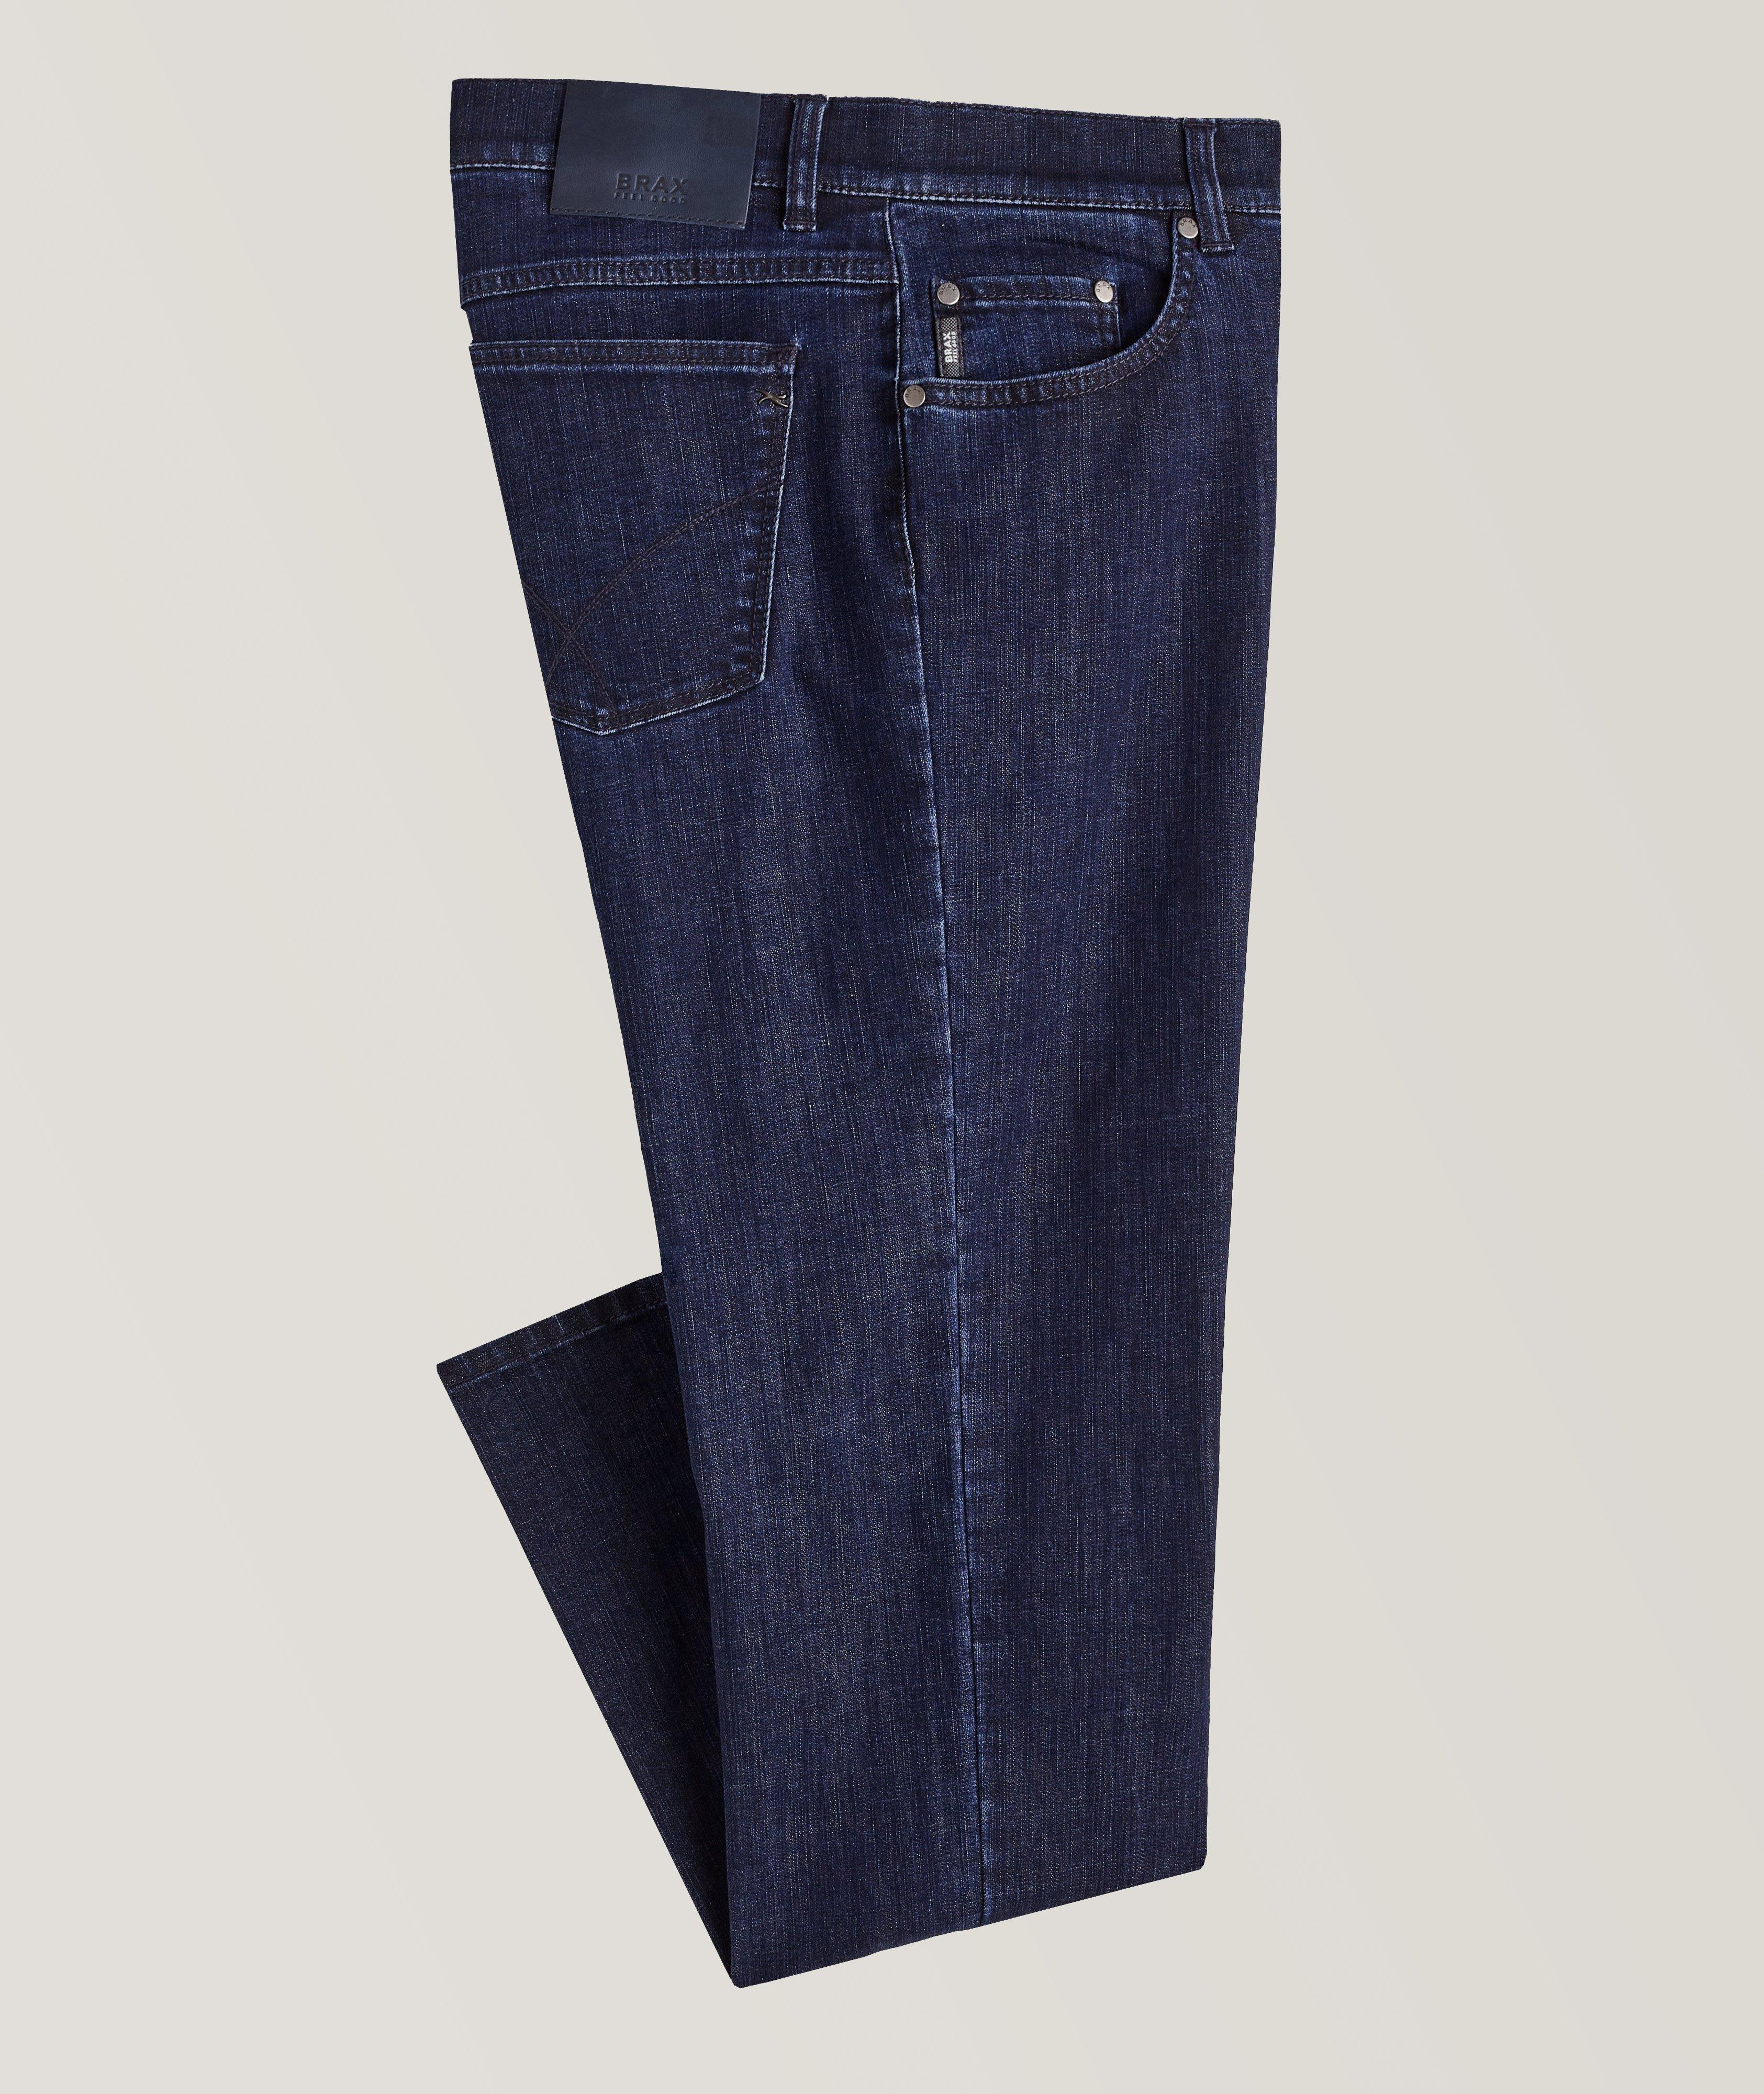 Cooper Straight Fit Jeans image 0